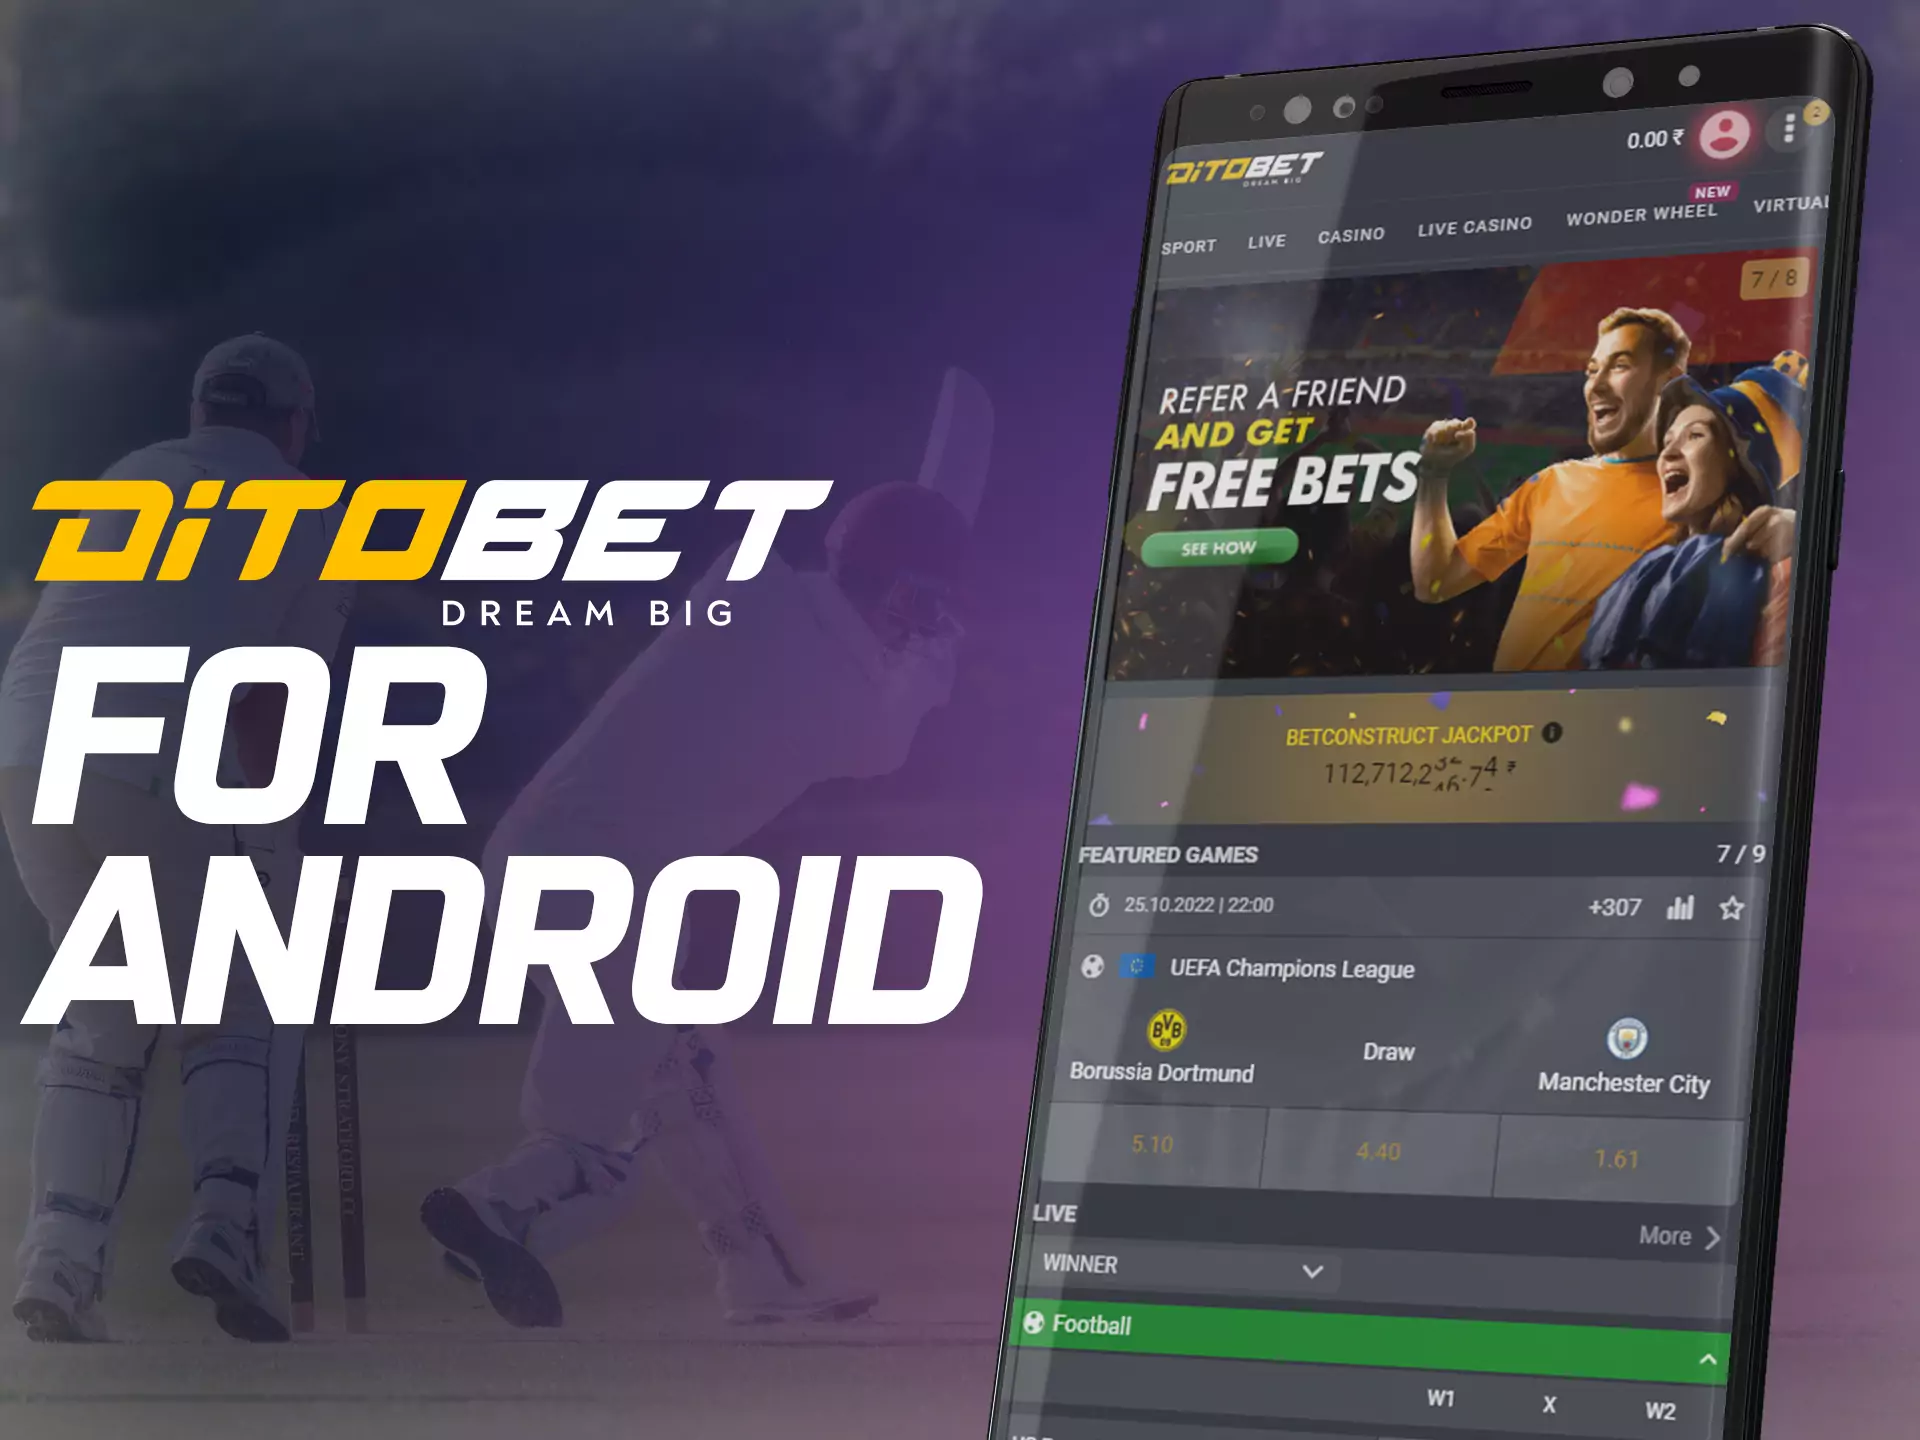 Play and win with Ditobet on your Android phone.